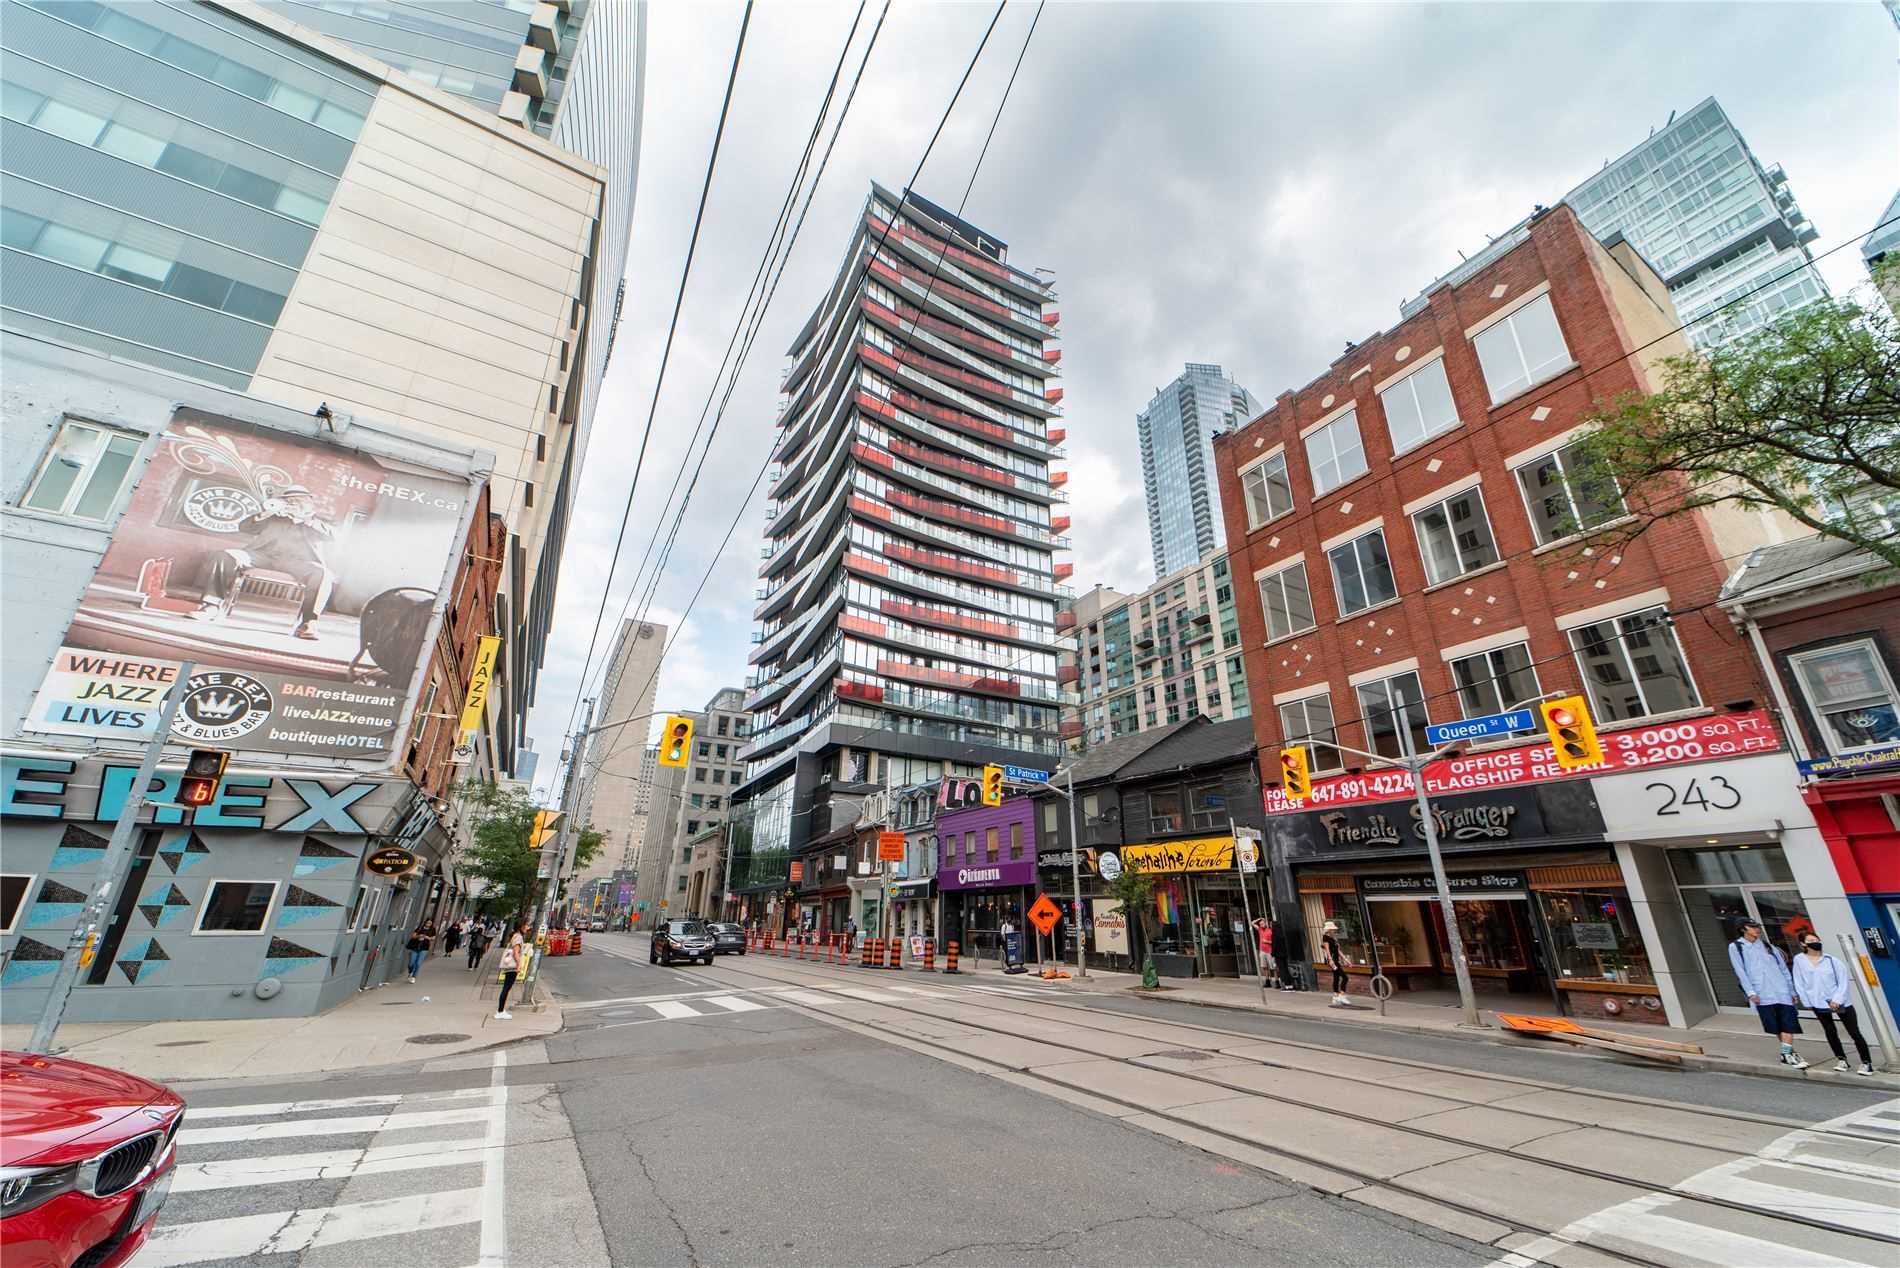 Queen Street West will soon have free WiFi at its new parkettes